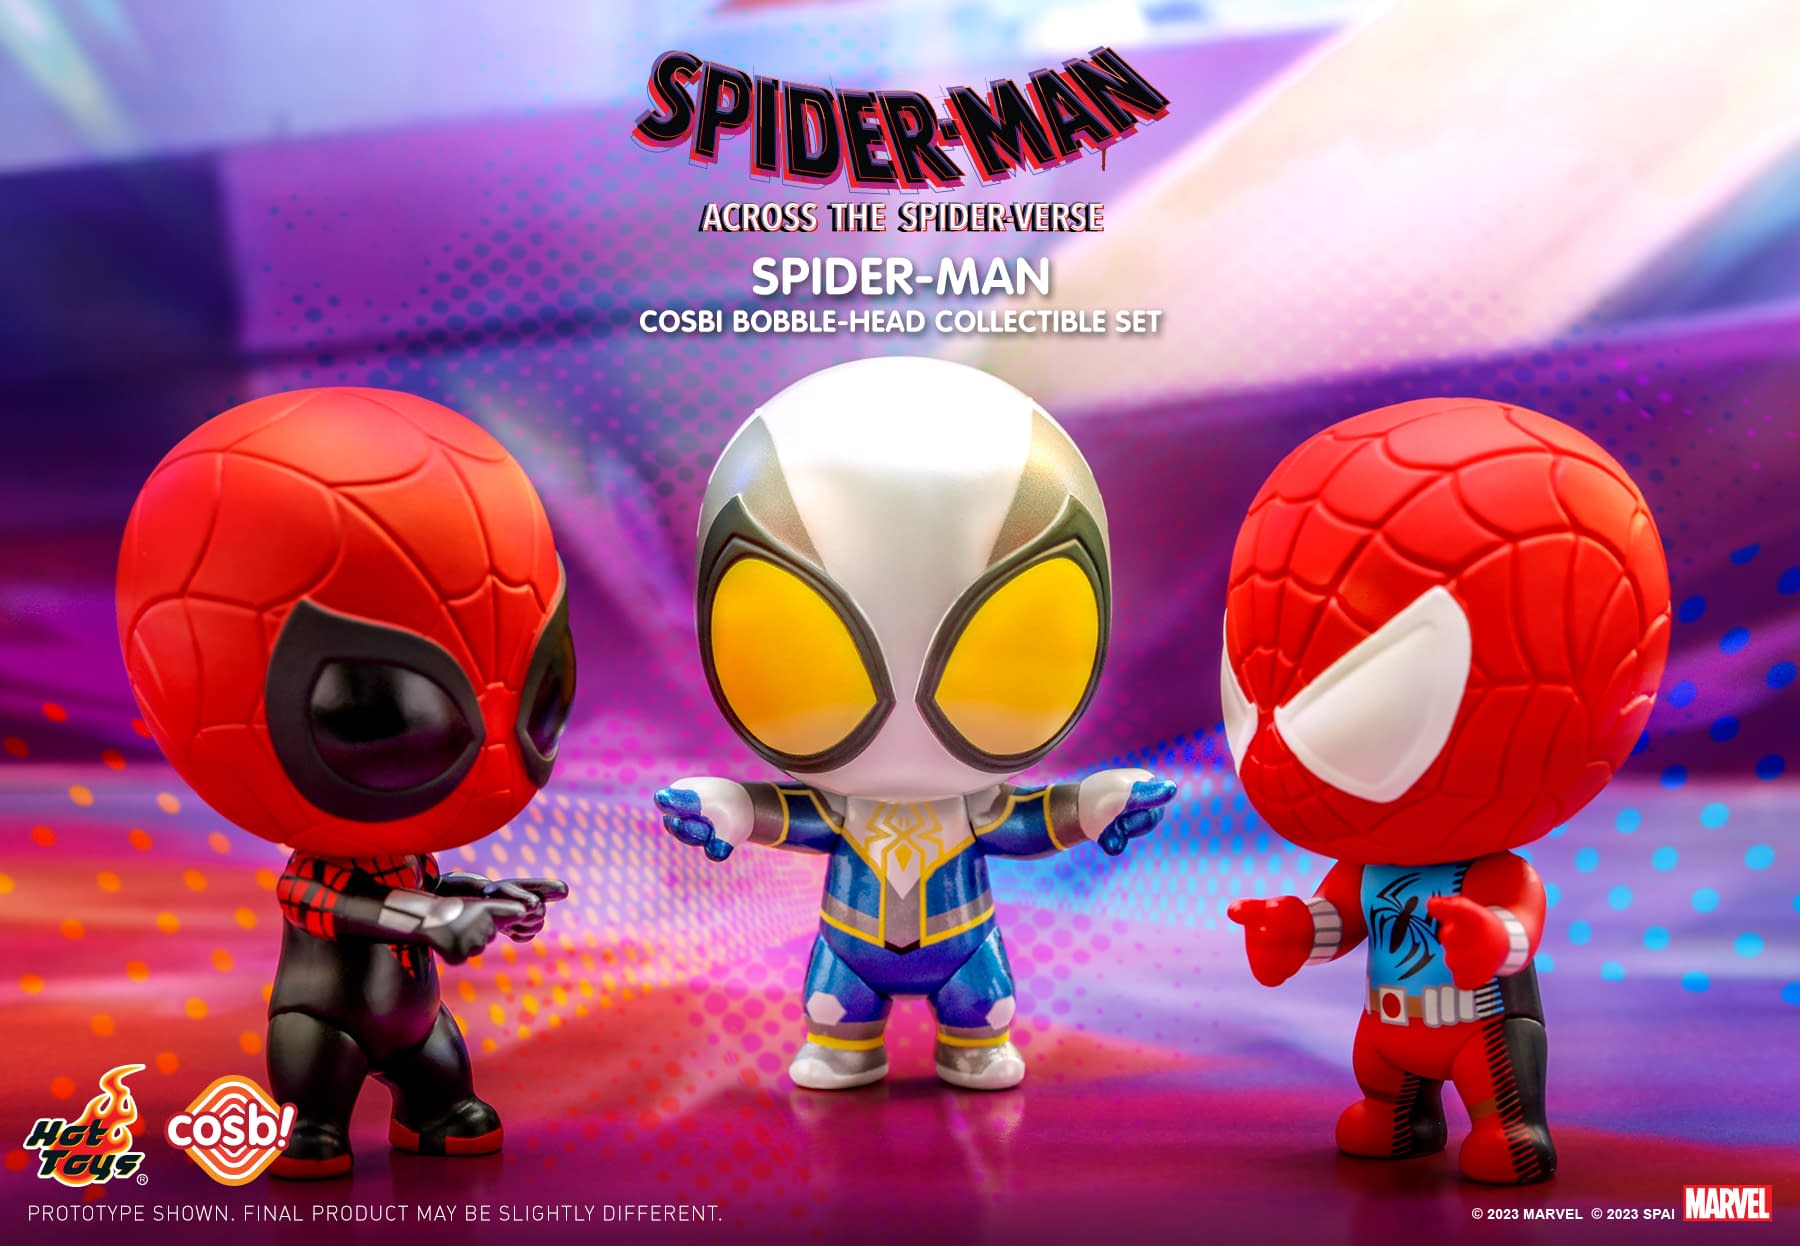 Enter the Spider Society with Hot Toys Newest Spider-Man Cosbi Set9